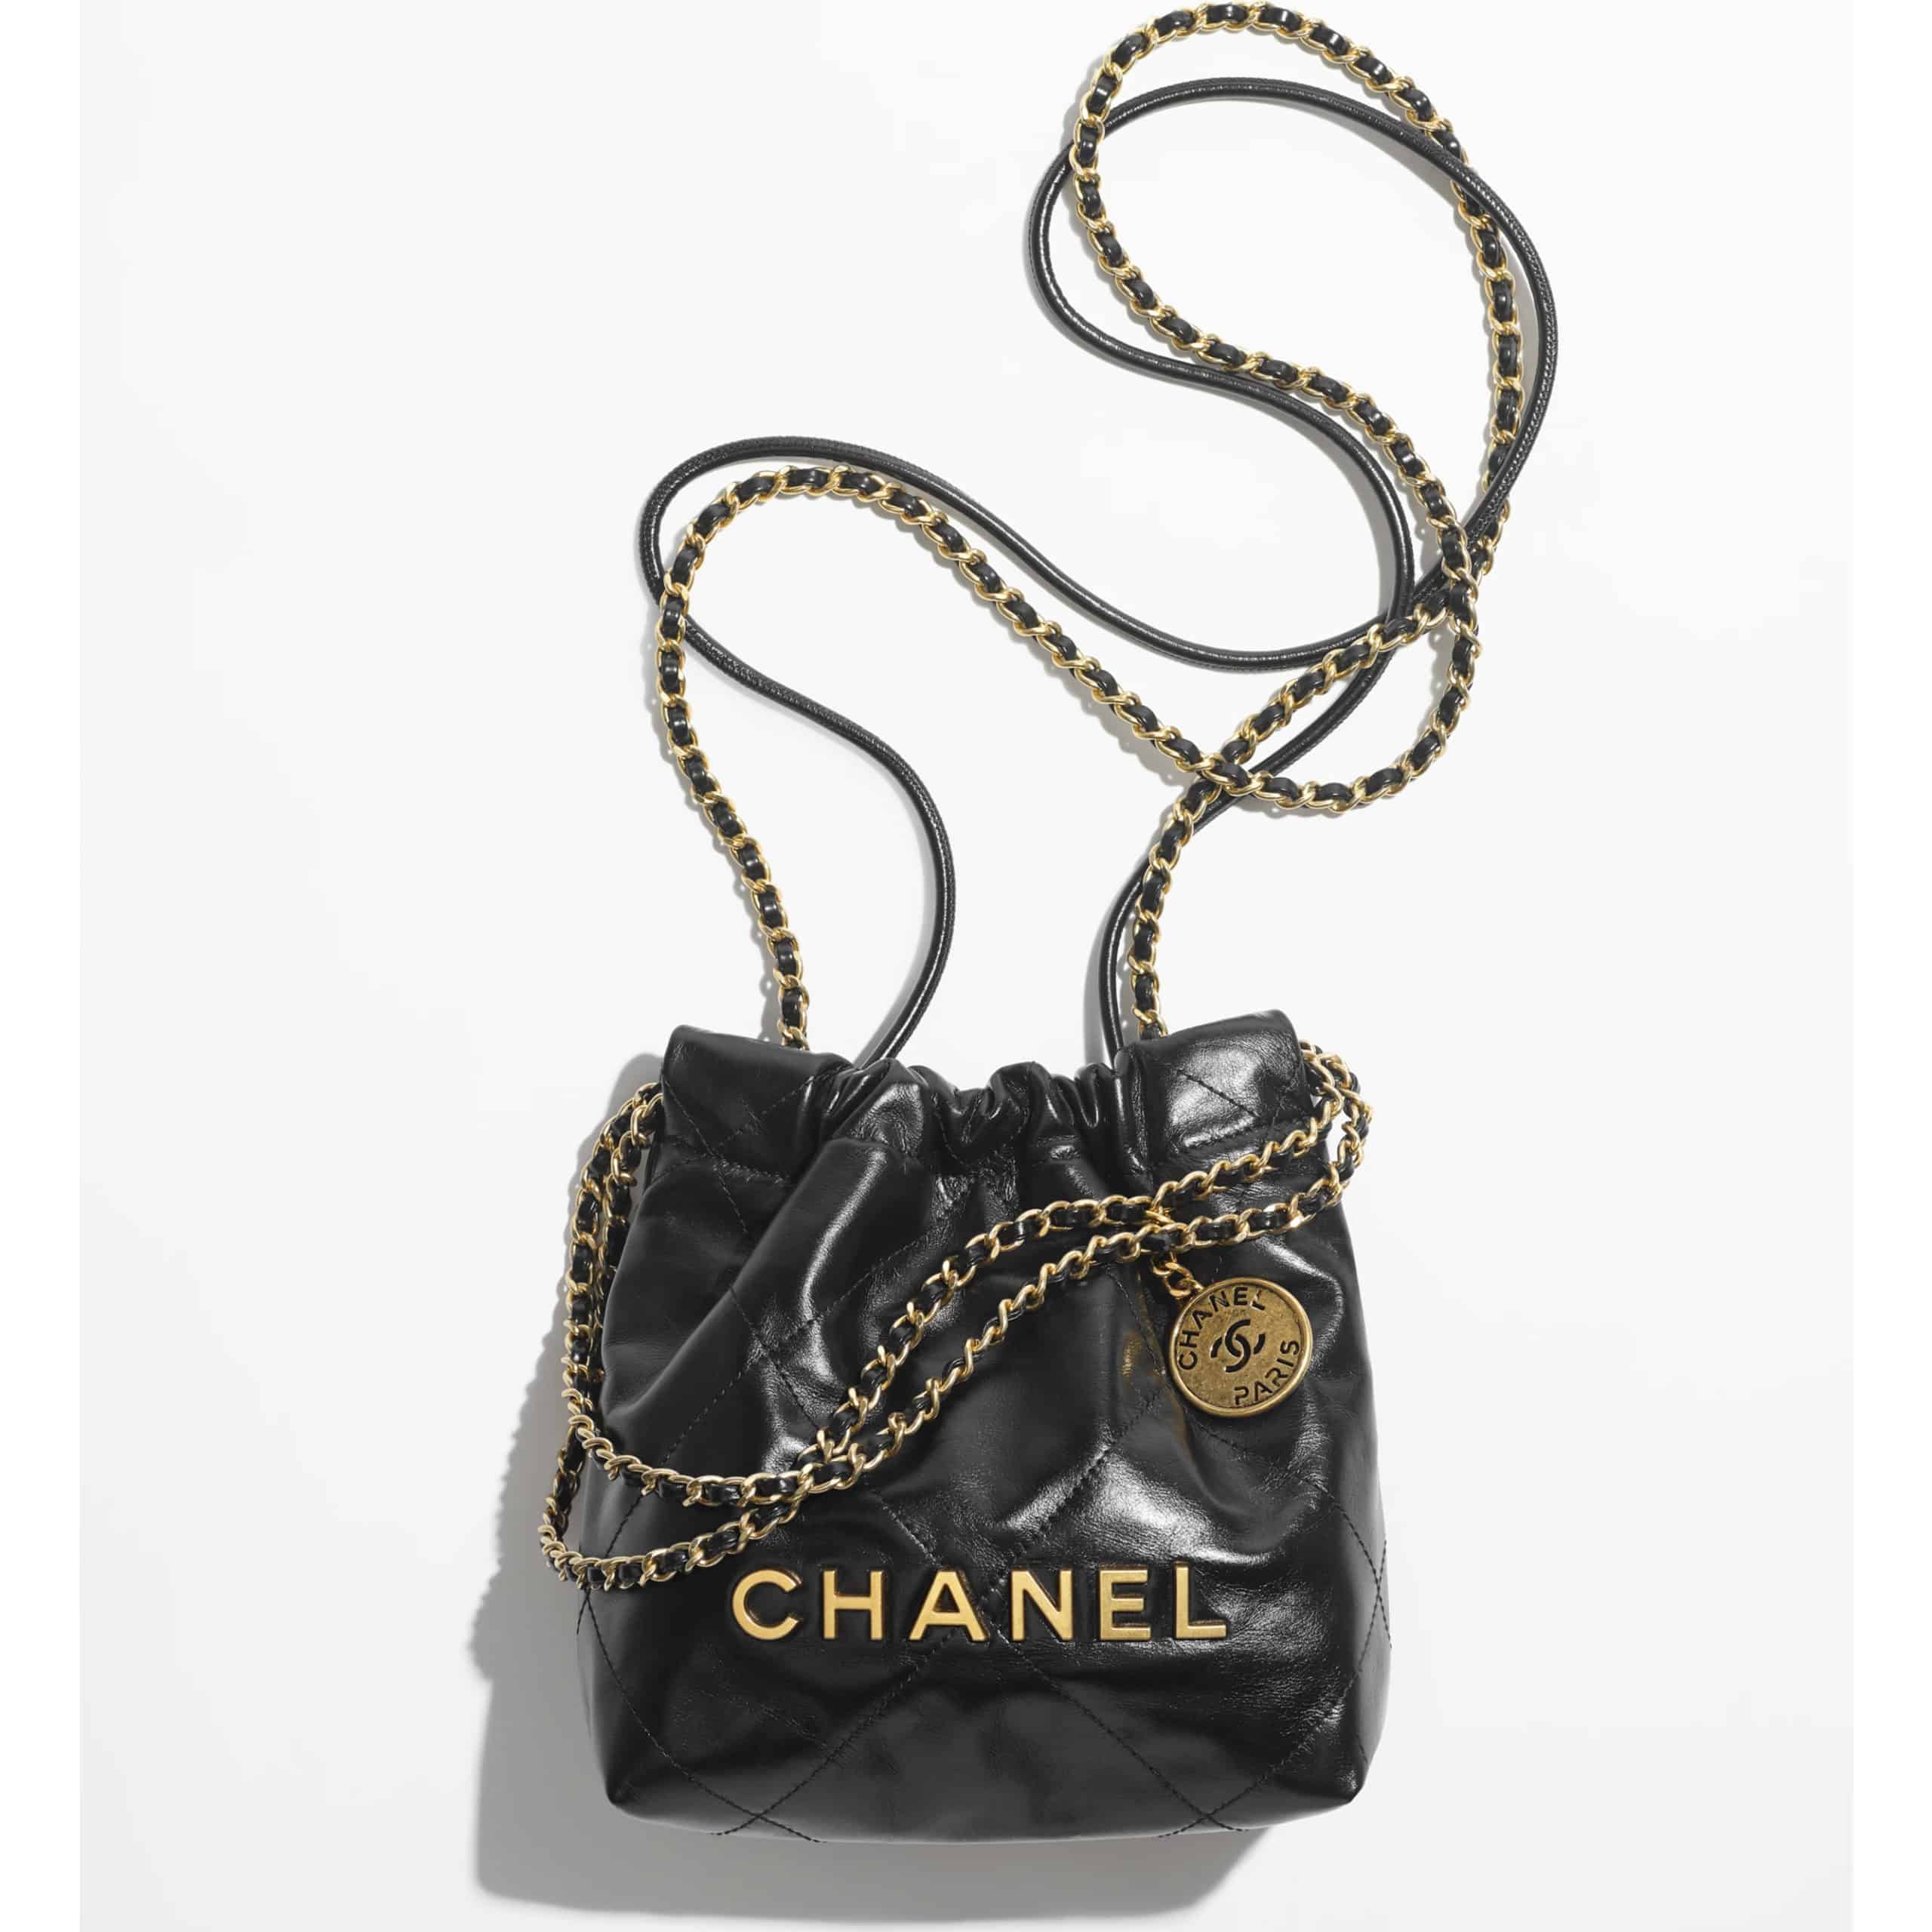 Chanel #22 Bag: Get Ready to Revolutionise Your Wardrobe